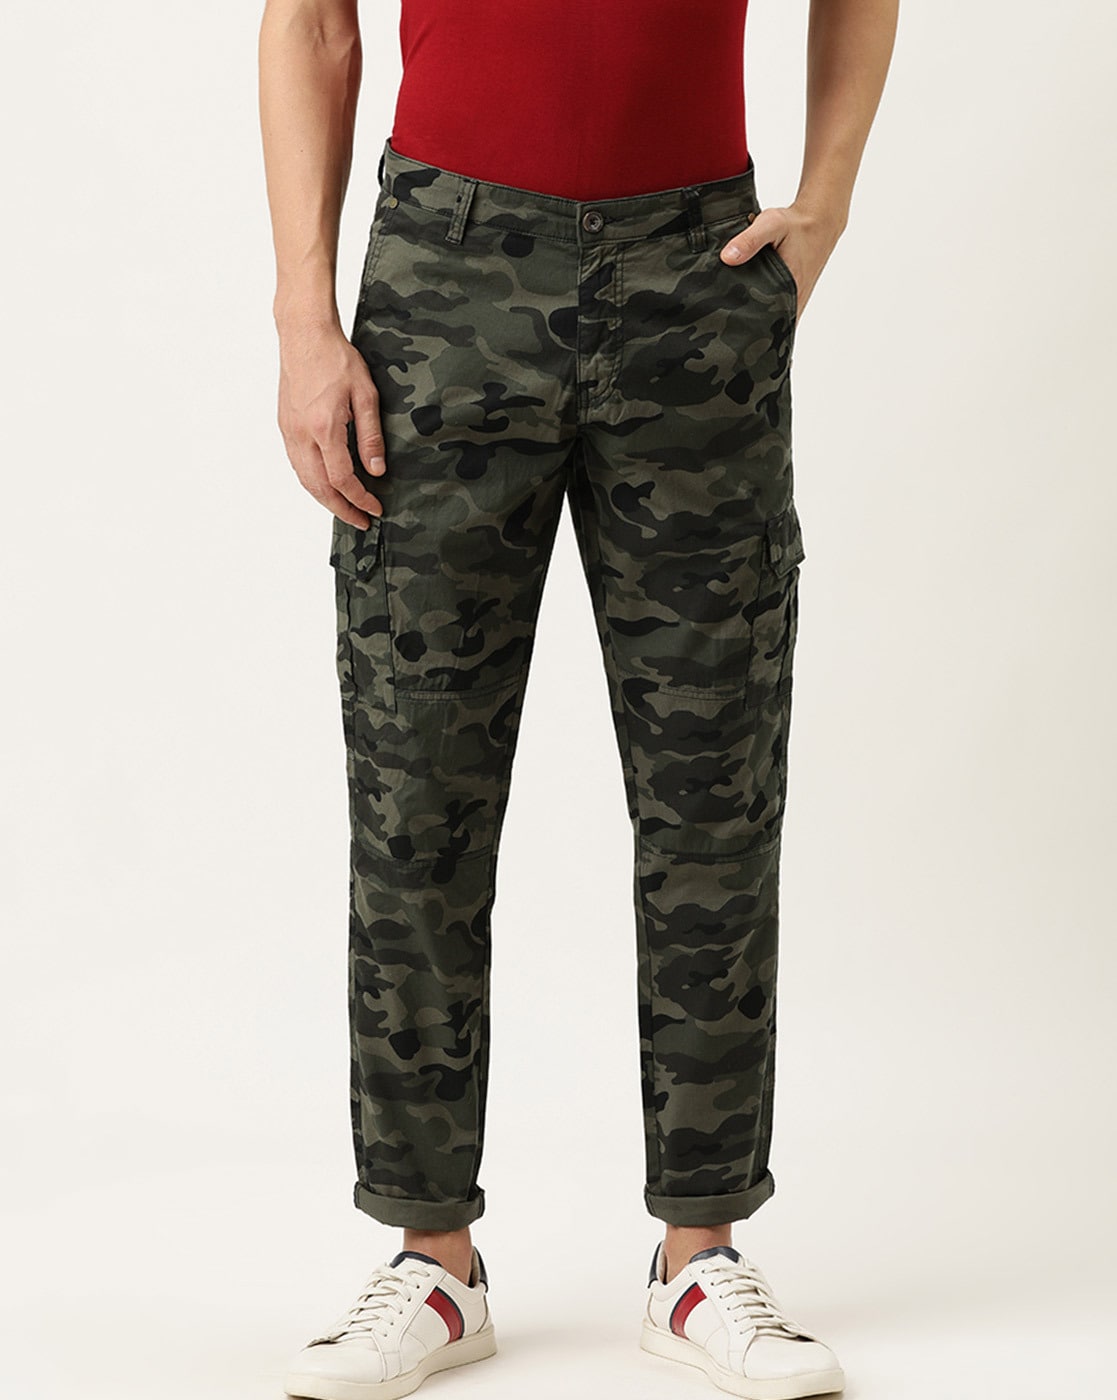 Buy Ukrainian Military Winter Camouflage Pants With Suspenders Online in  India - Etsy